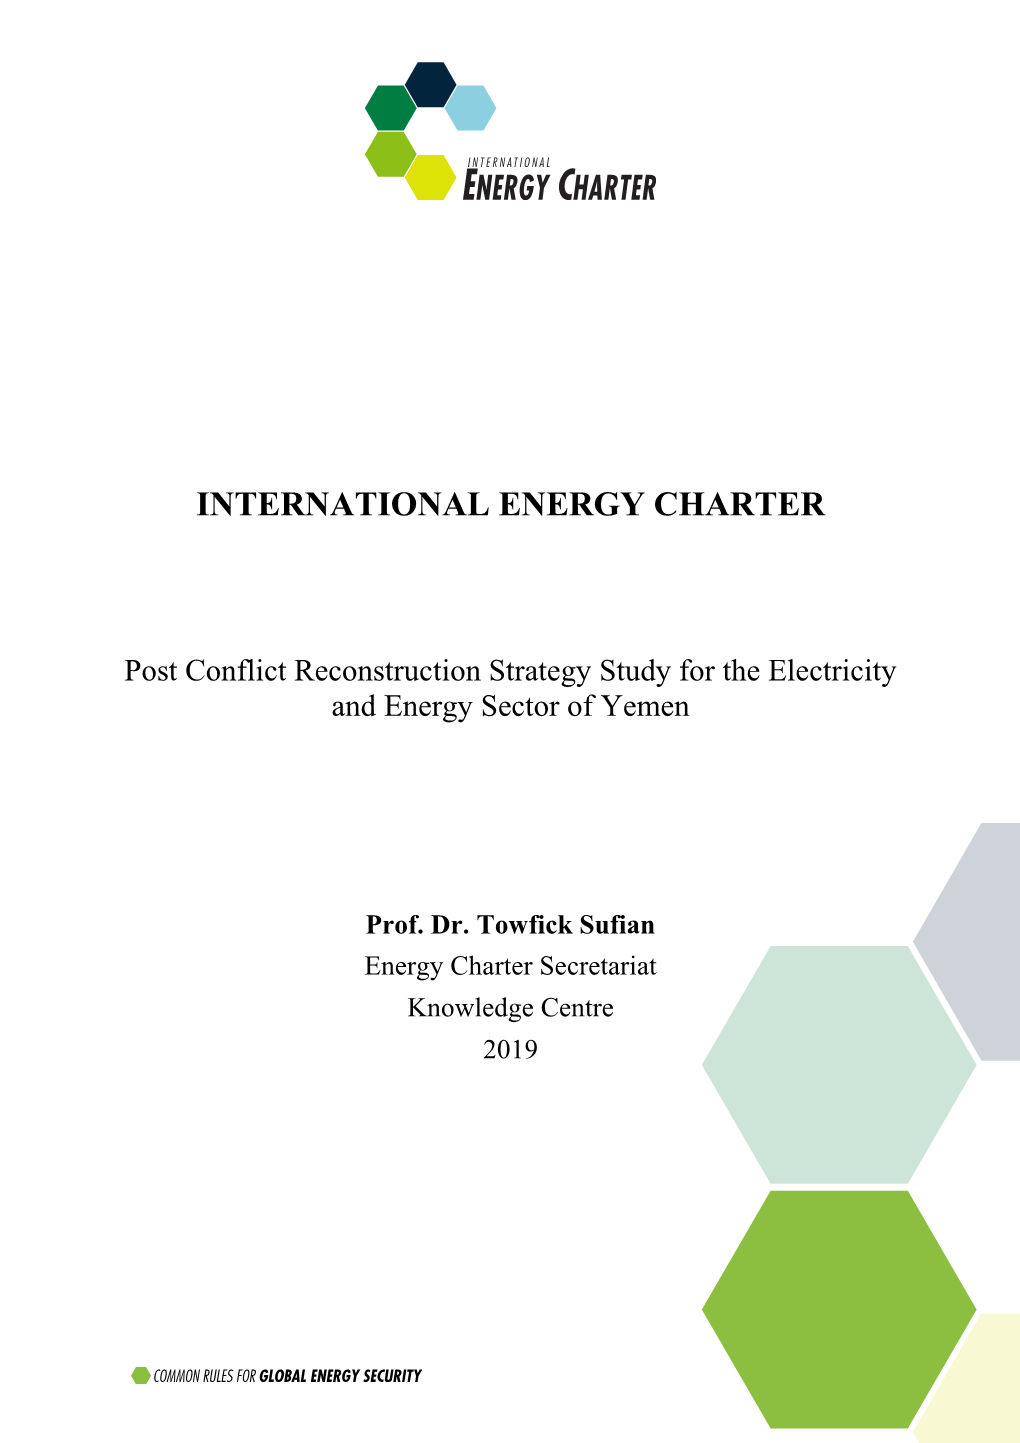 Post Conflict Reconstruction Strategy Study for the Electricity and Energy Sector of Yemen